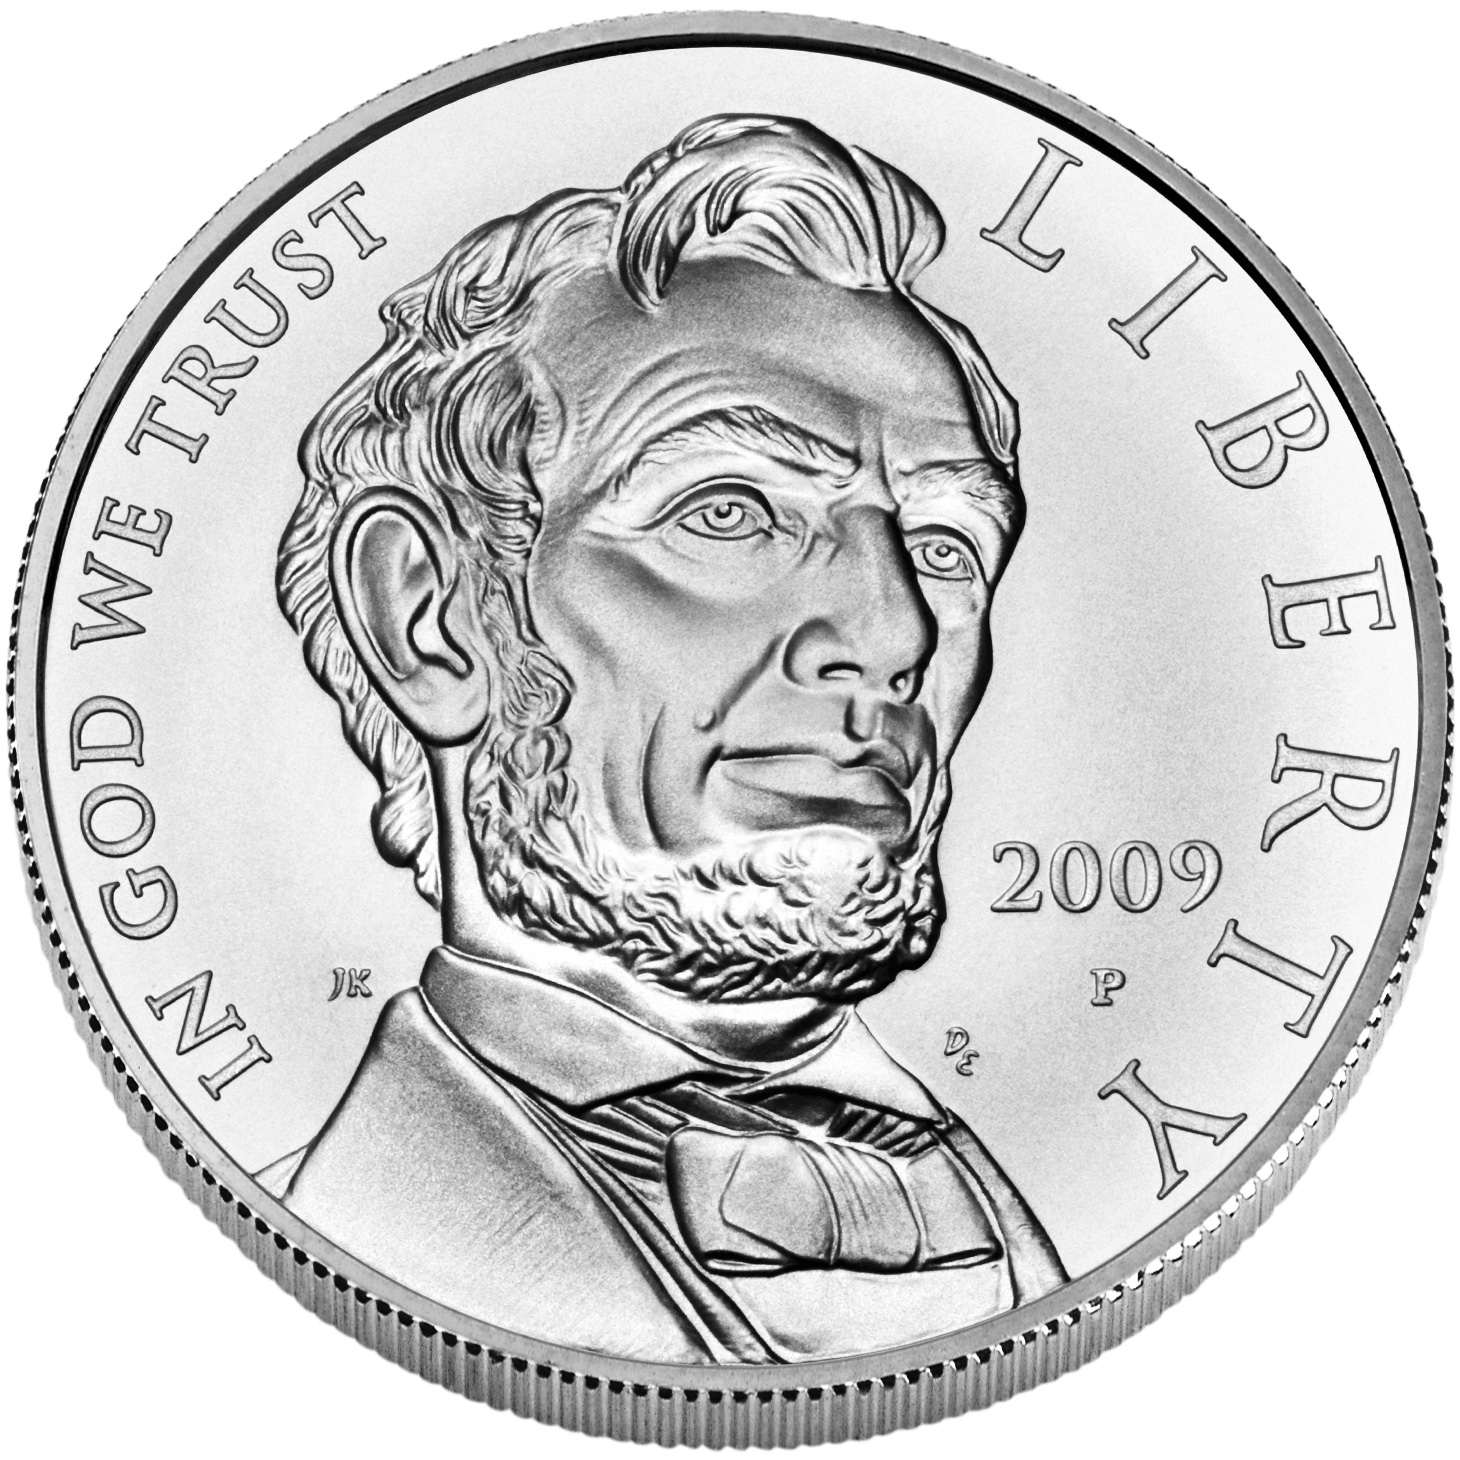 Every U.S. commemorative coin, like this Abraham Lincoln silver dollar, features the national motto IN GOD WE TRUST.